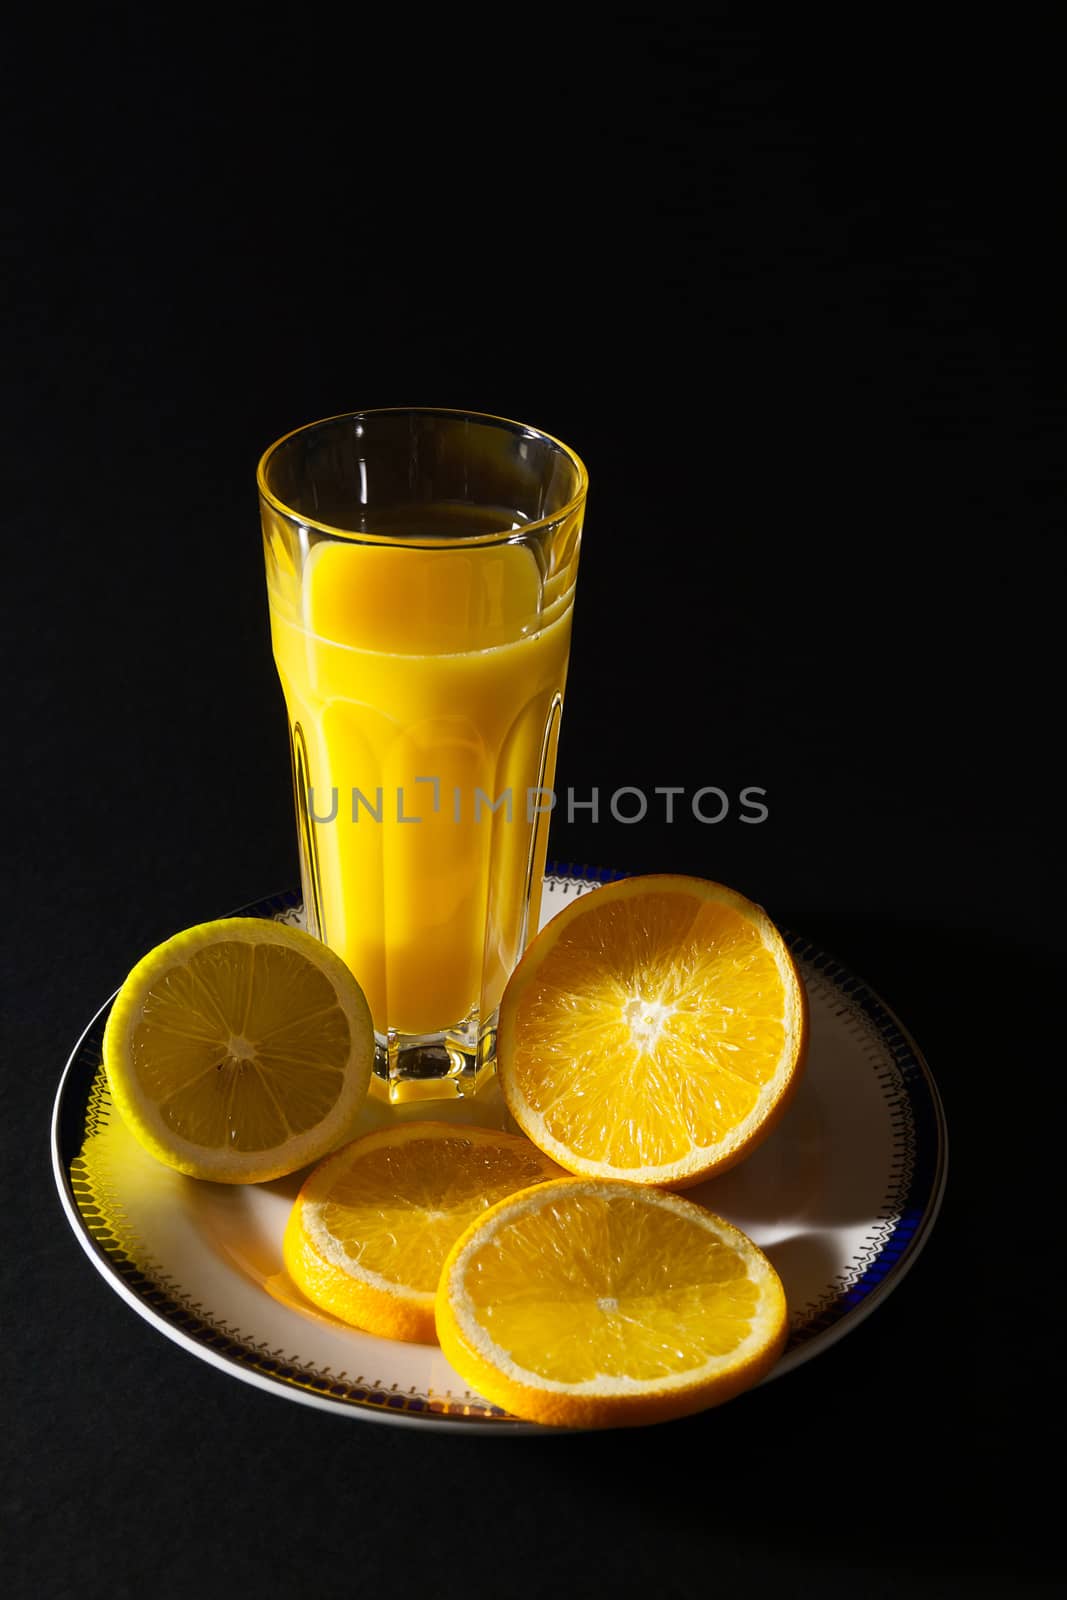 An orange juice served in a tall glass